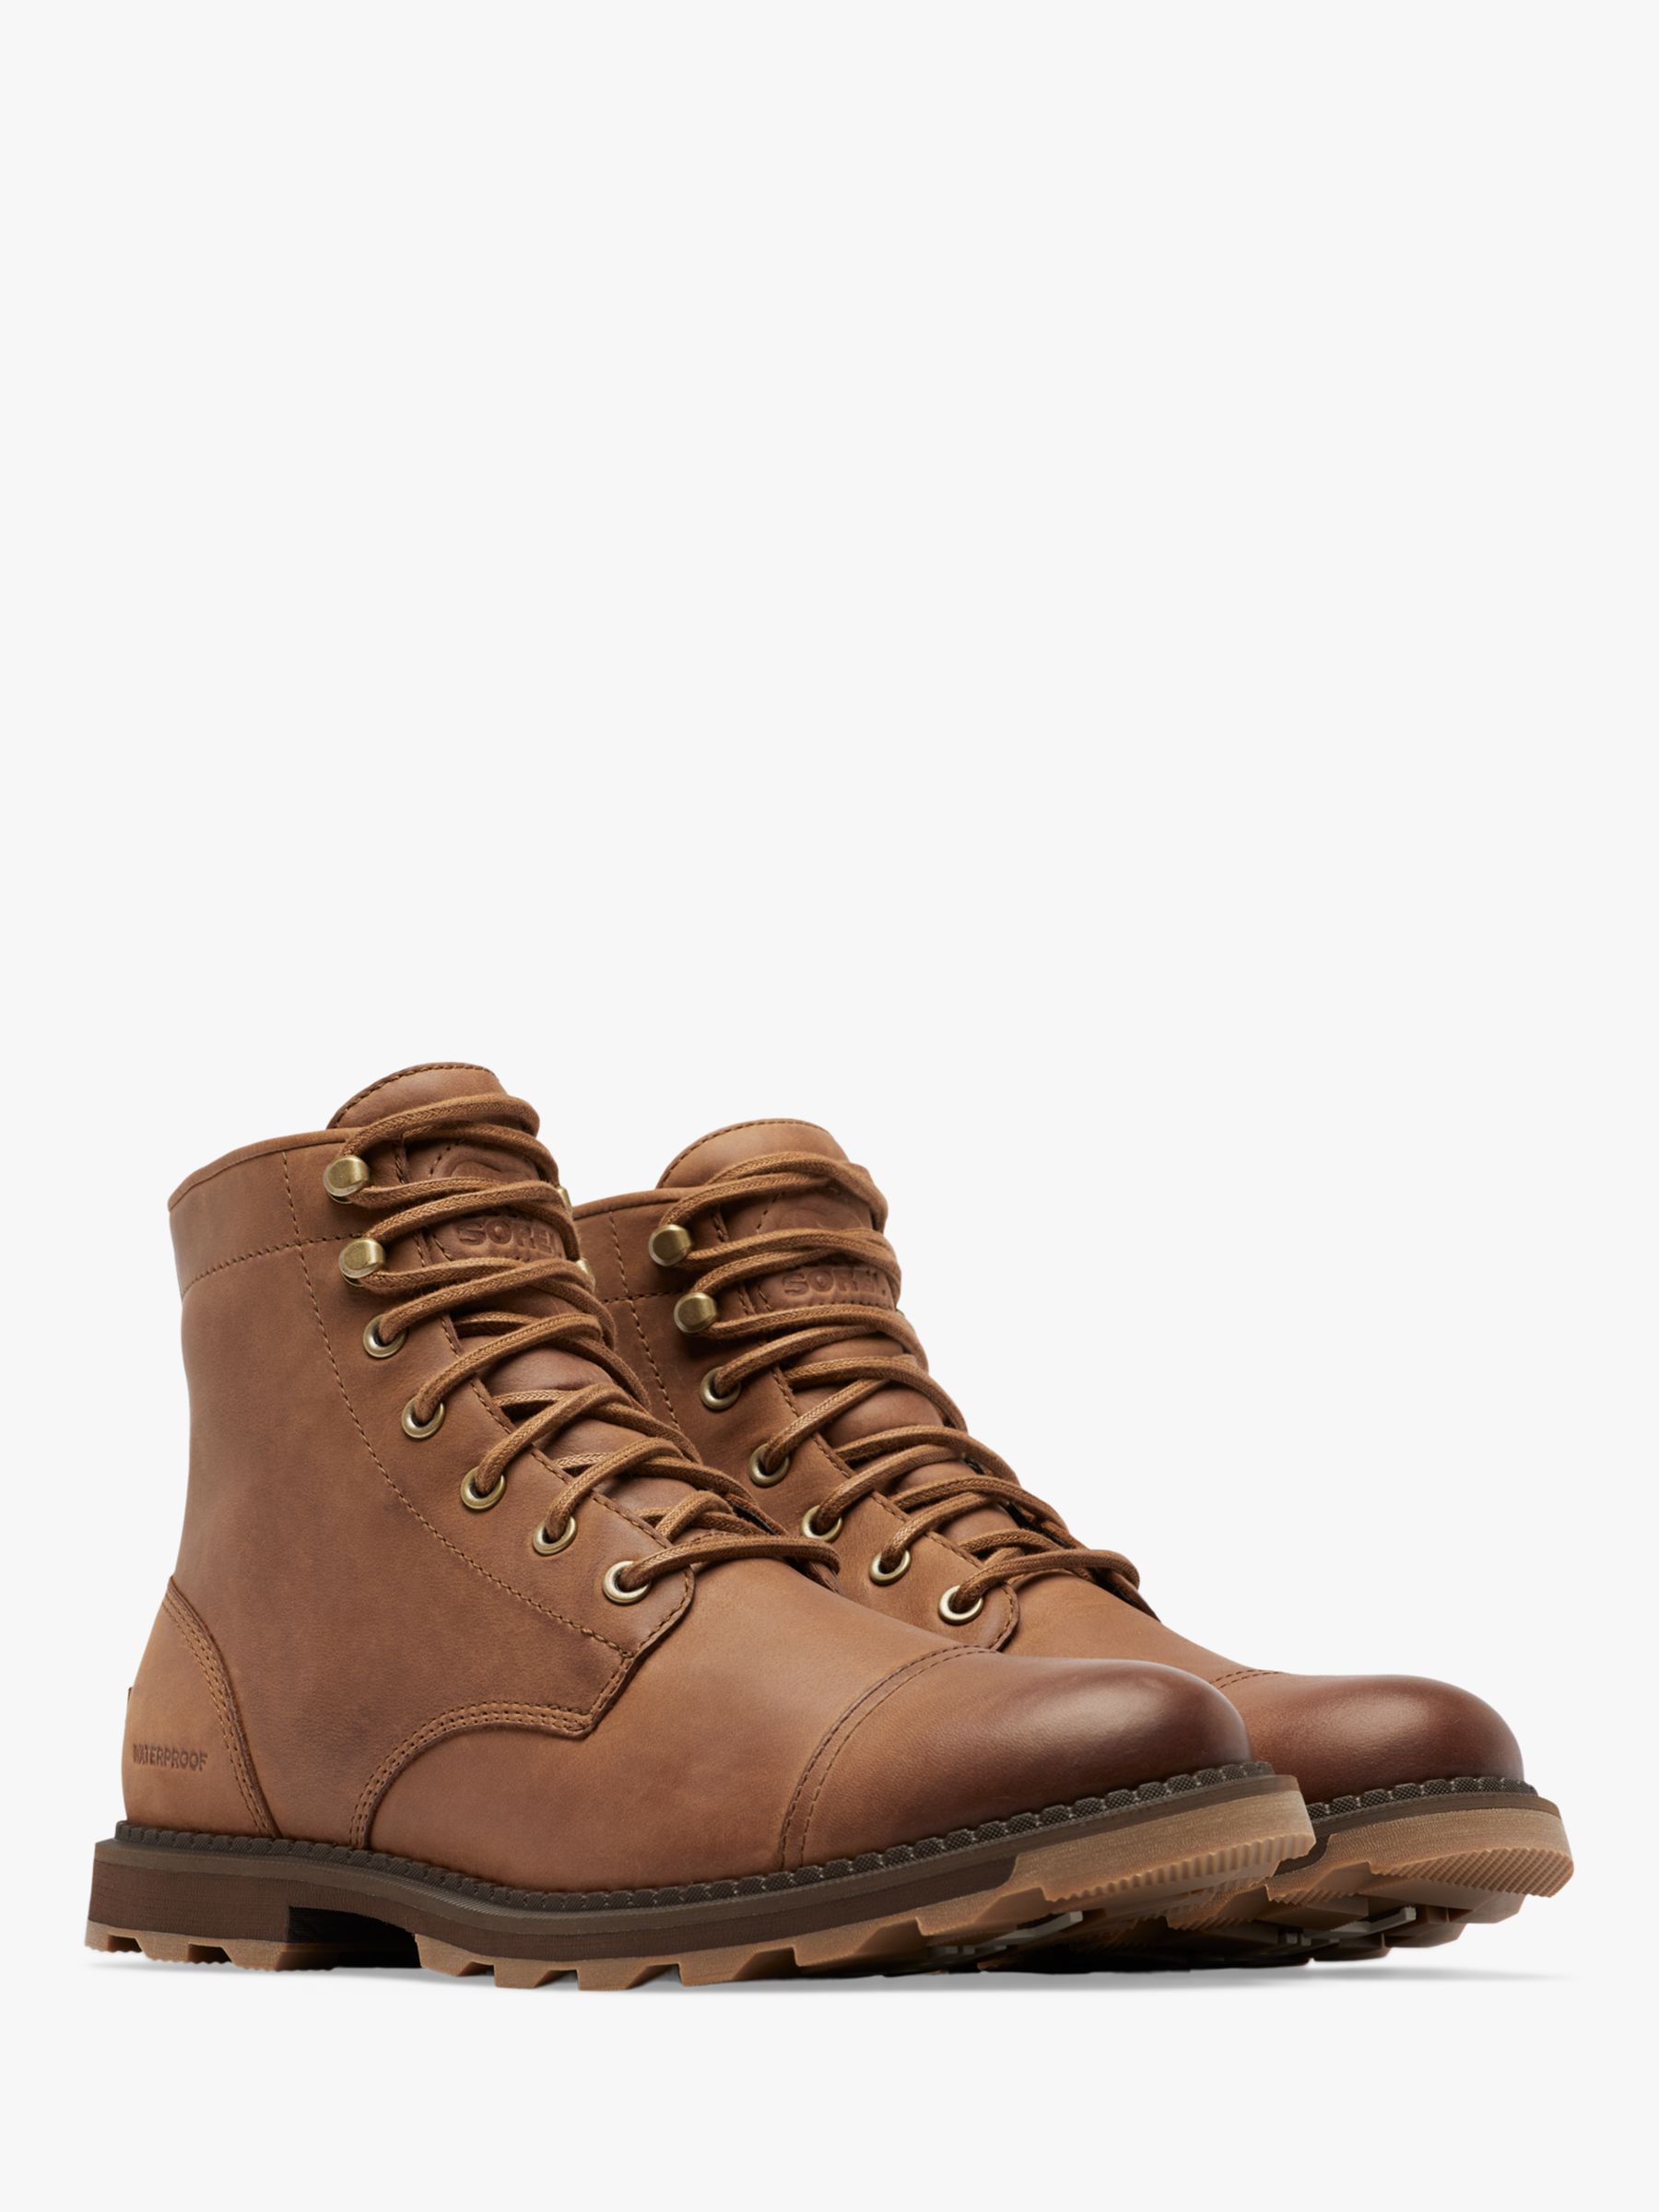 SOREL Madson II Chore Leather Waterproof Ankle Boots, Tan at John Lewis &  Partners